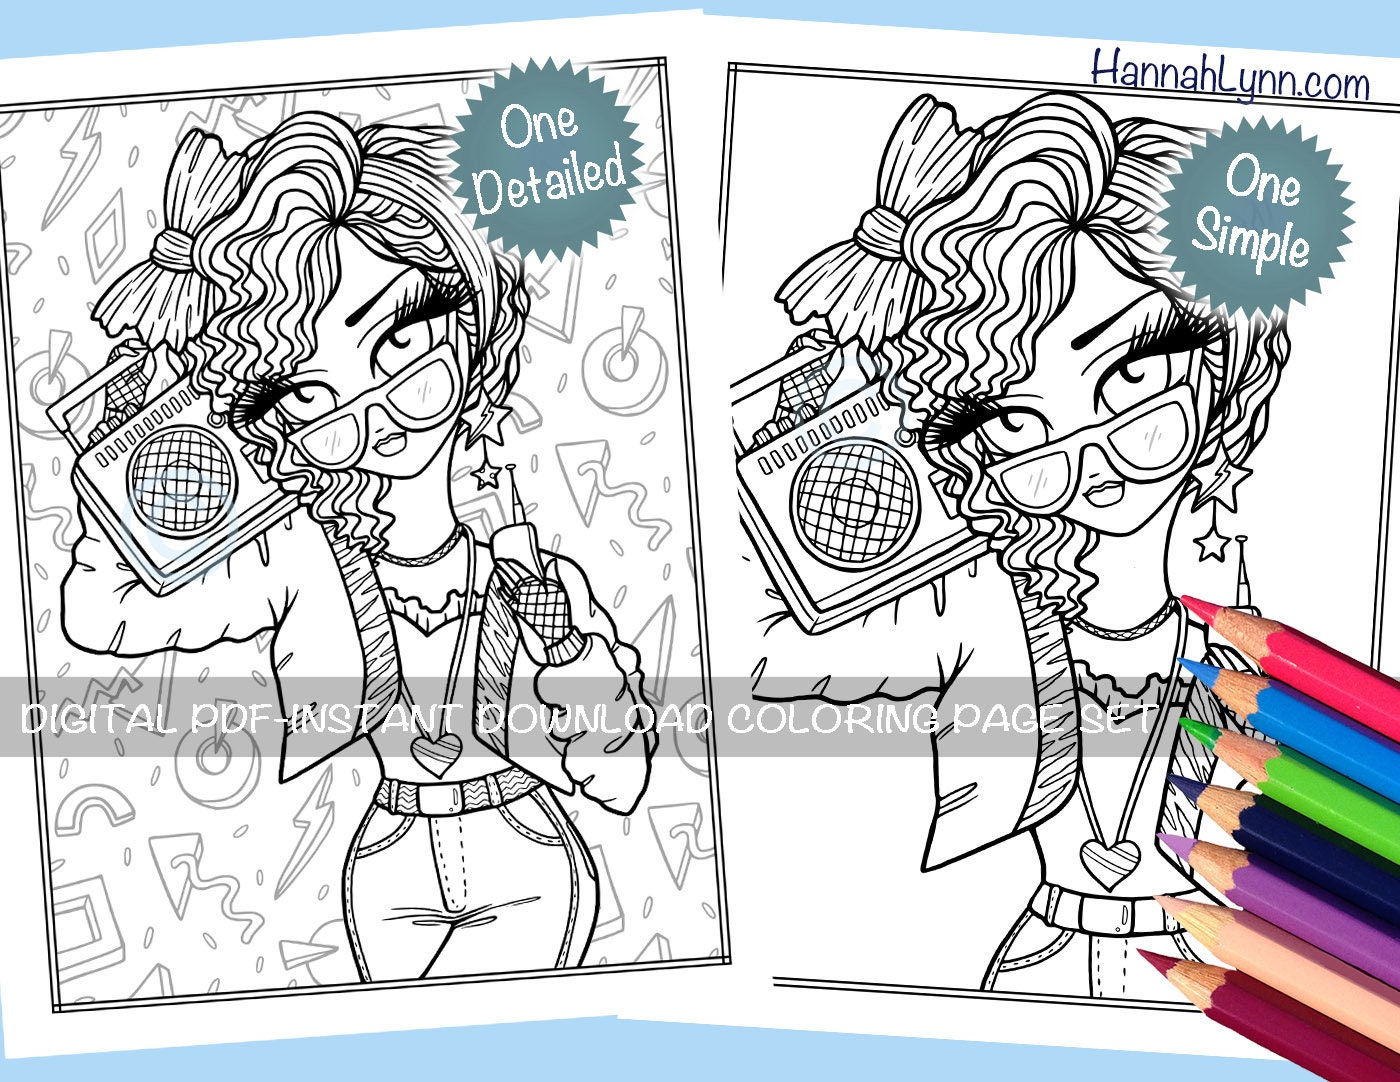 Boombox baby s music coloring page set cute big eye whimsy girls historical character line art pdf download printable hannah lynn